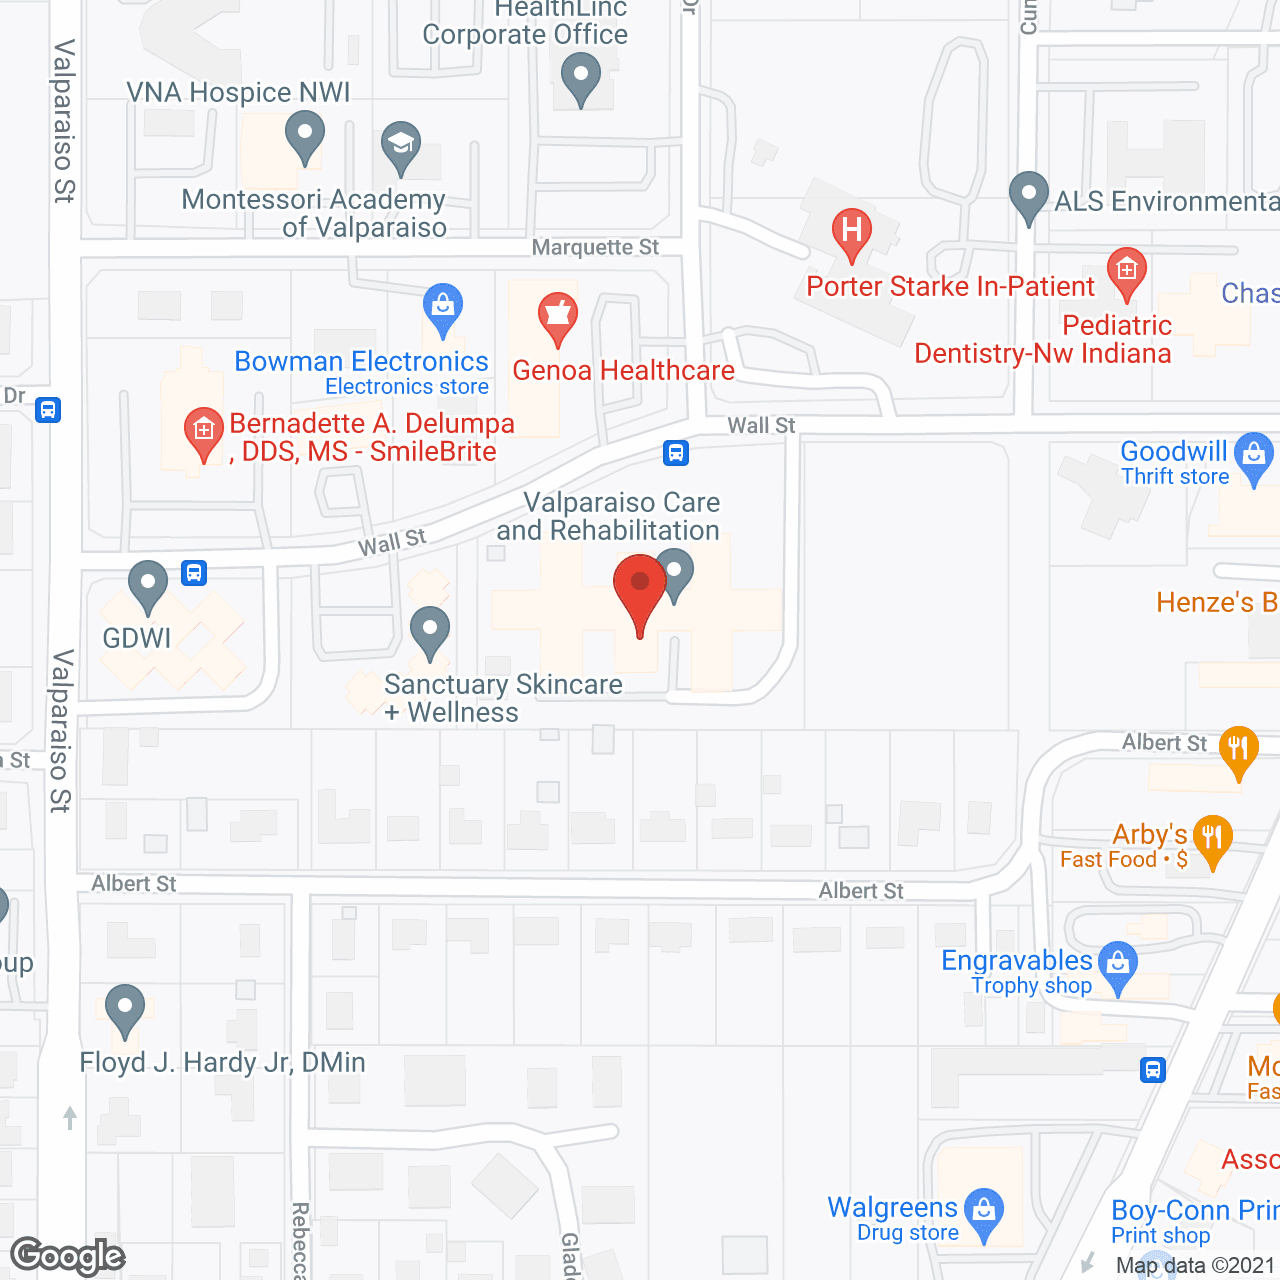 Valparaiso Care and Rehab Center in google map